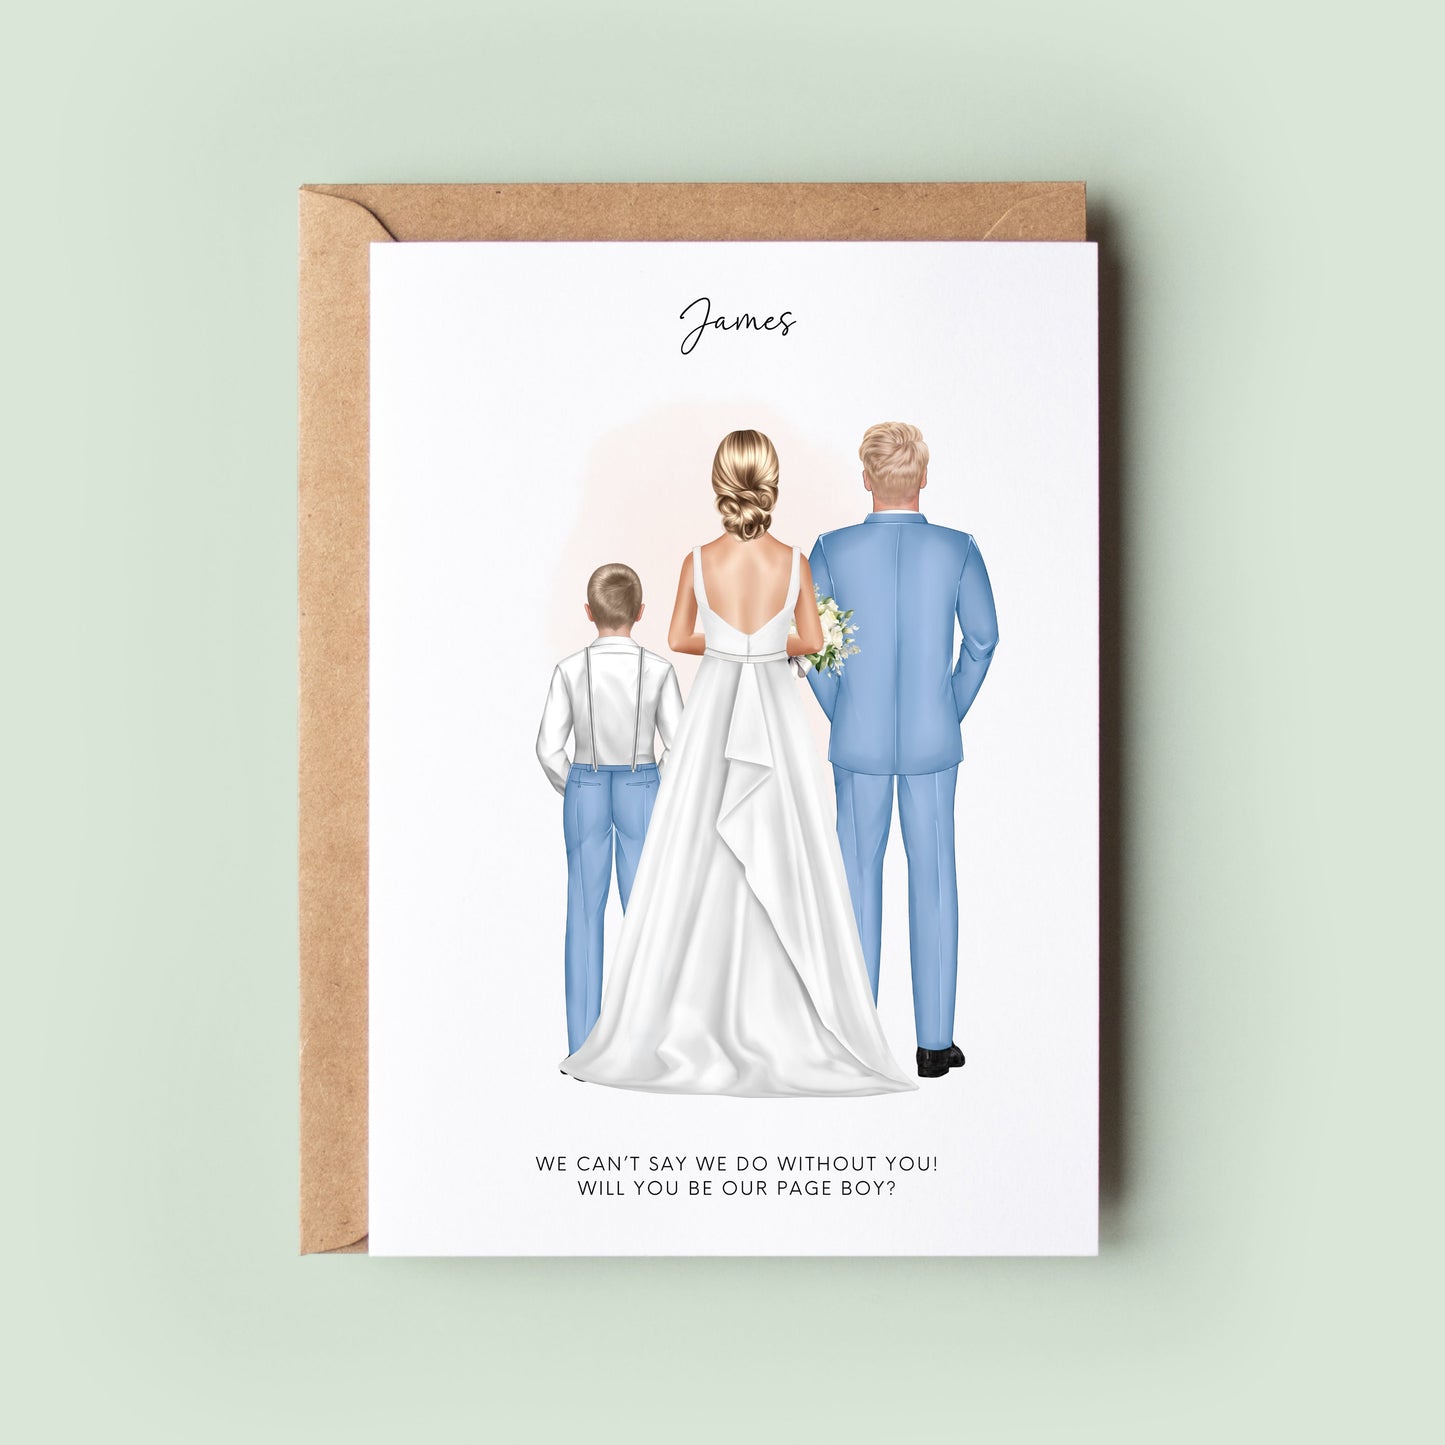 Personalised Will You Be Our Page Boy Proposal Card - Custom Ring Bearer Invitation from Bride & Groom, Unique Page Boy Gift Idea